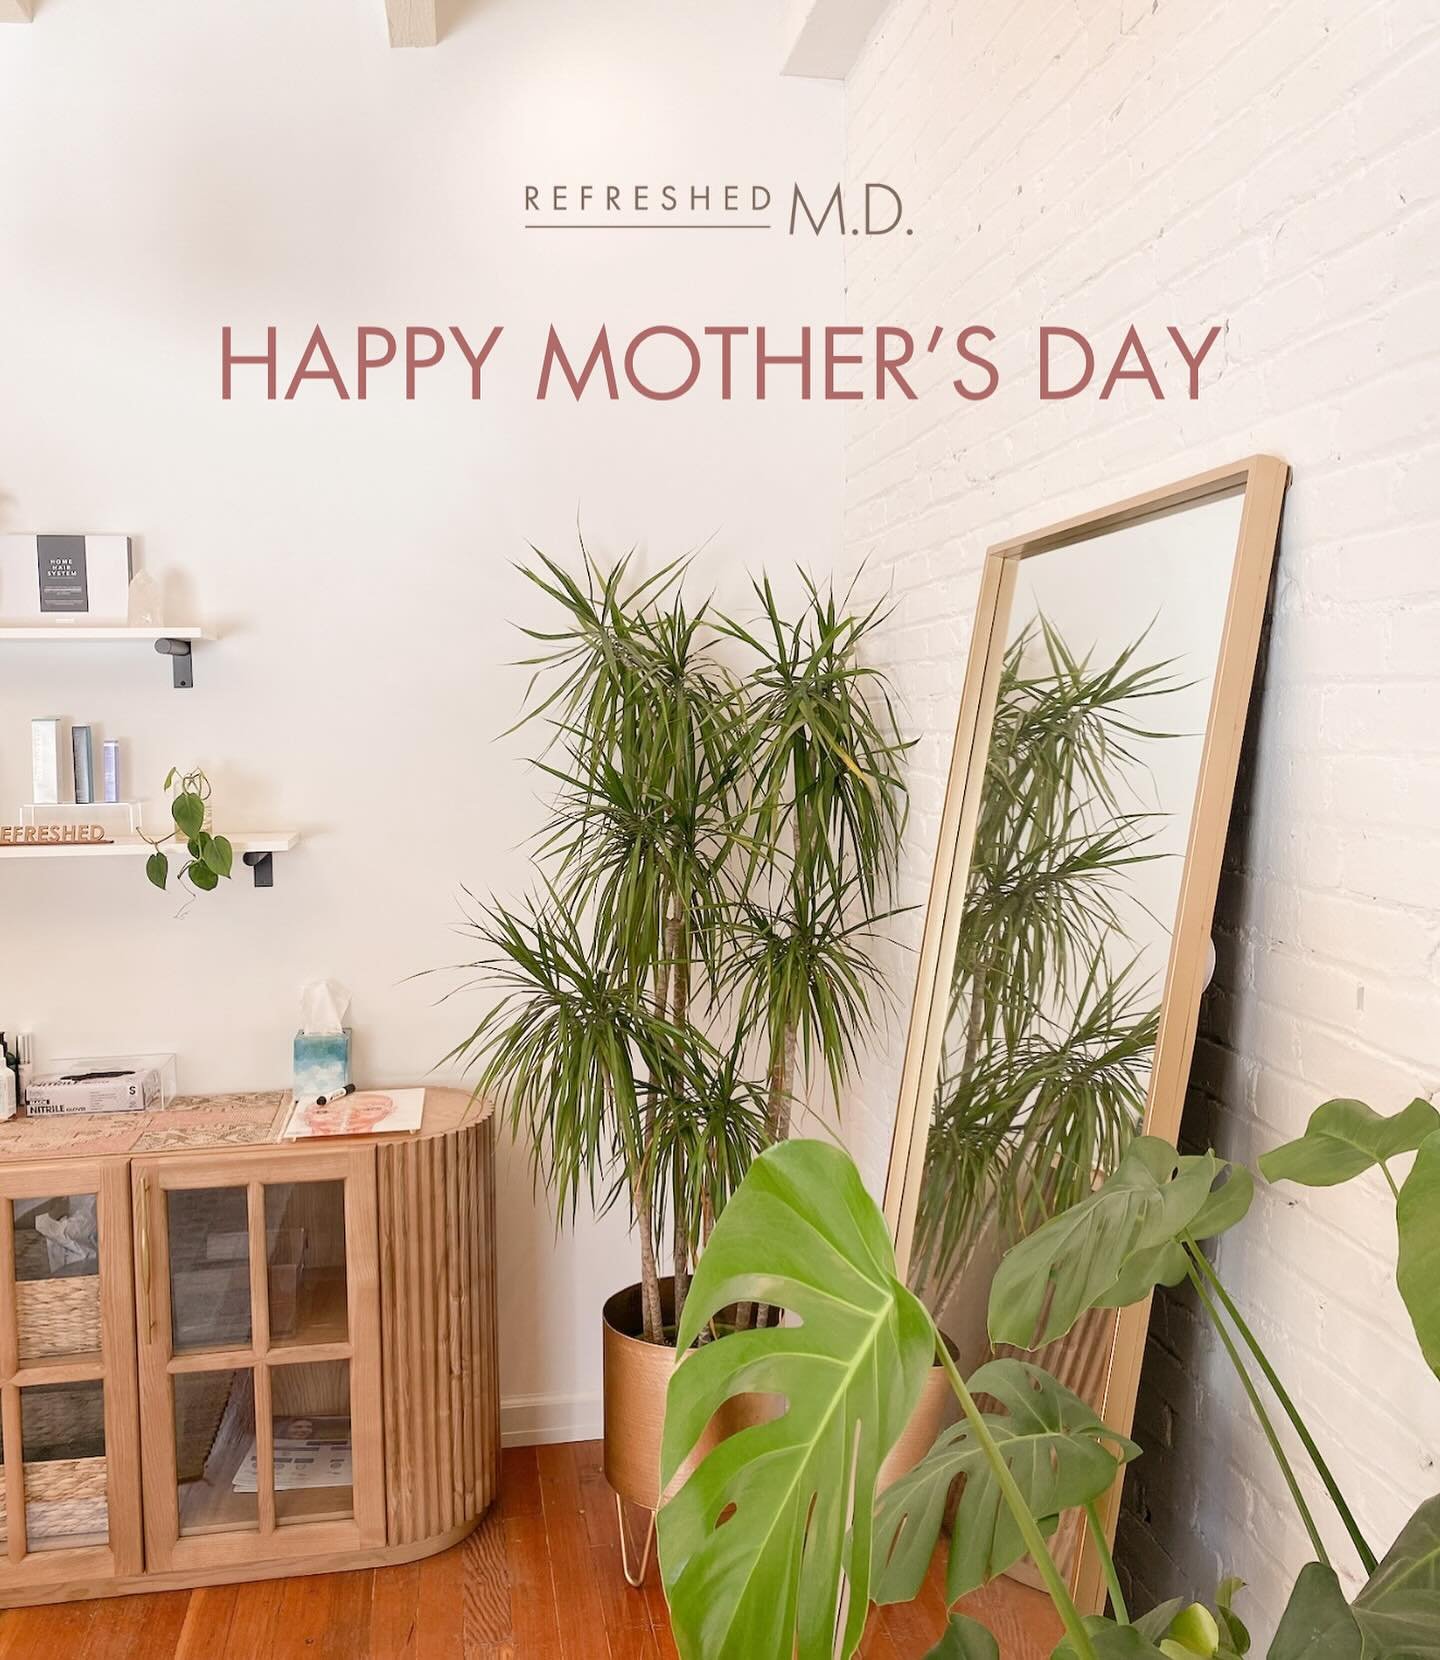 Happy Mother&rsquo;s Day to all of the amazing Moms! 💗 we appreciate you✨

#refreshedmd #mothersday #celebratingmoms